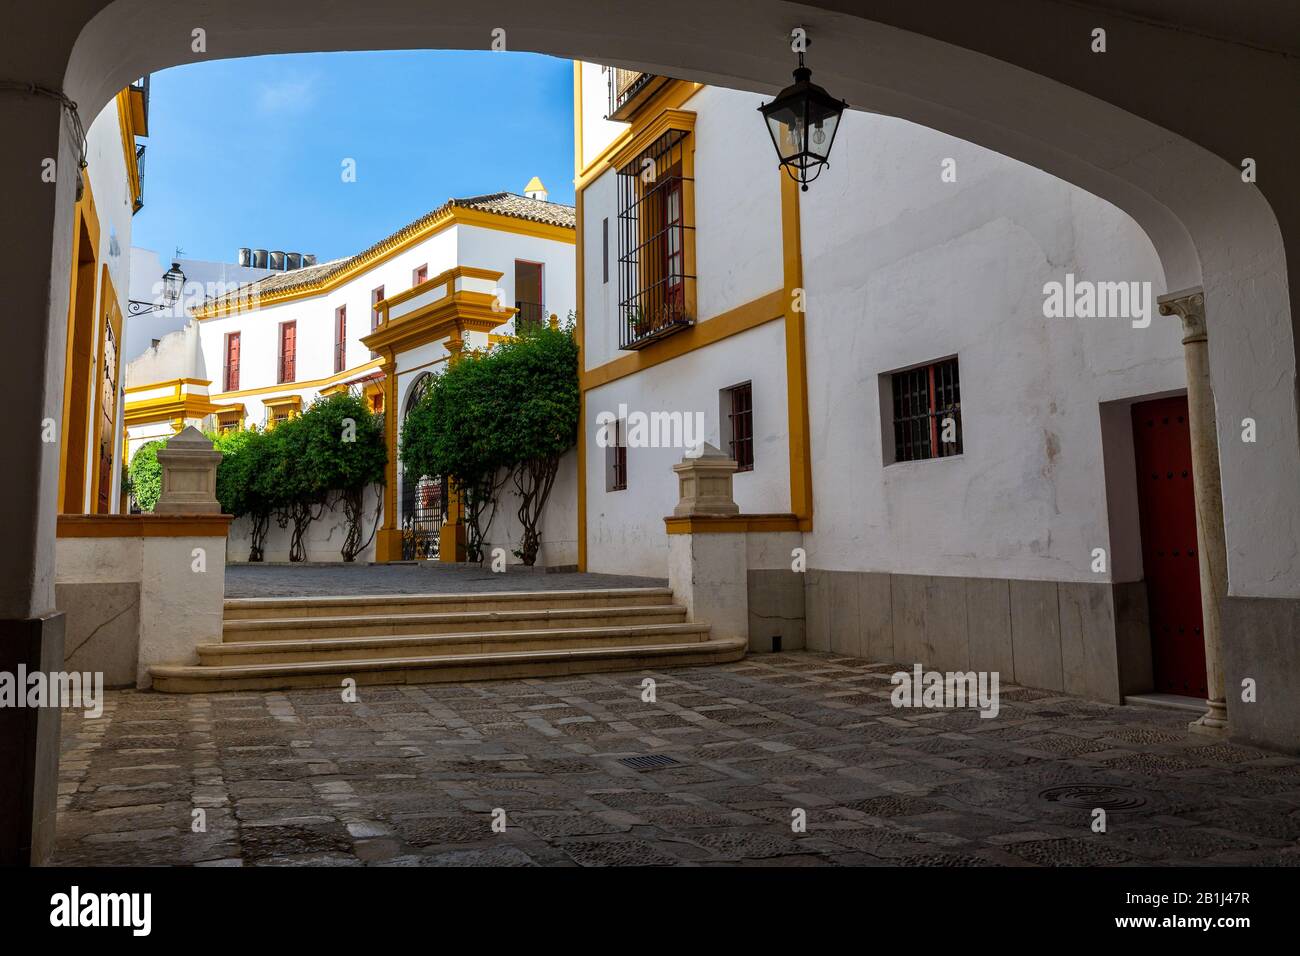 Entrance to the Bullfighting arena of Seville, Andalucia, Spain. Stock Photo